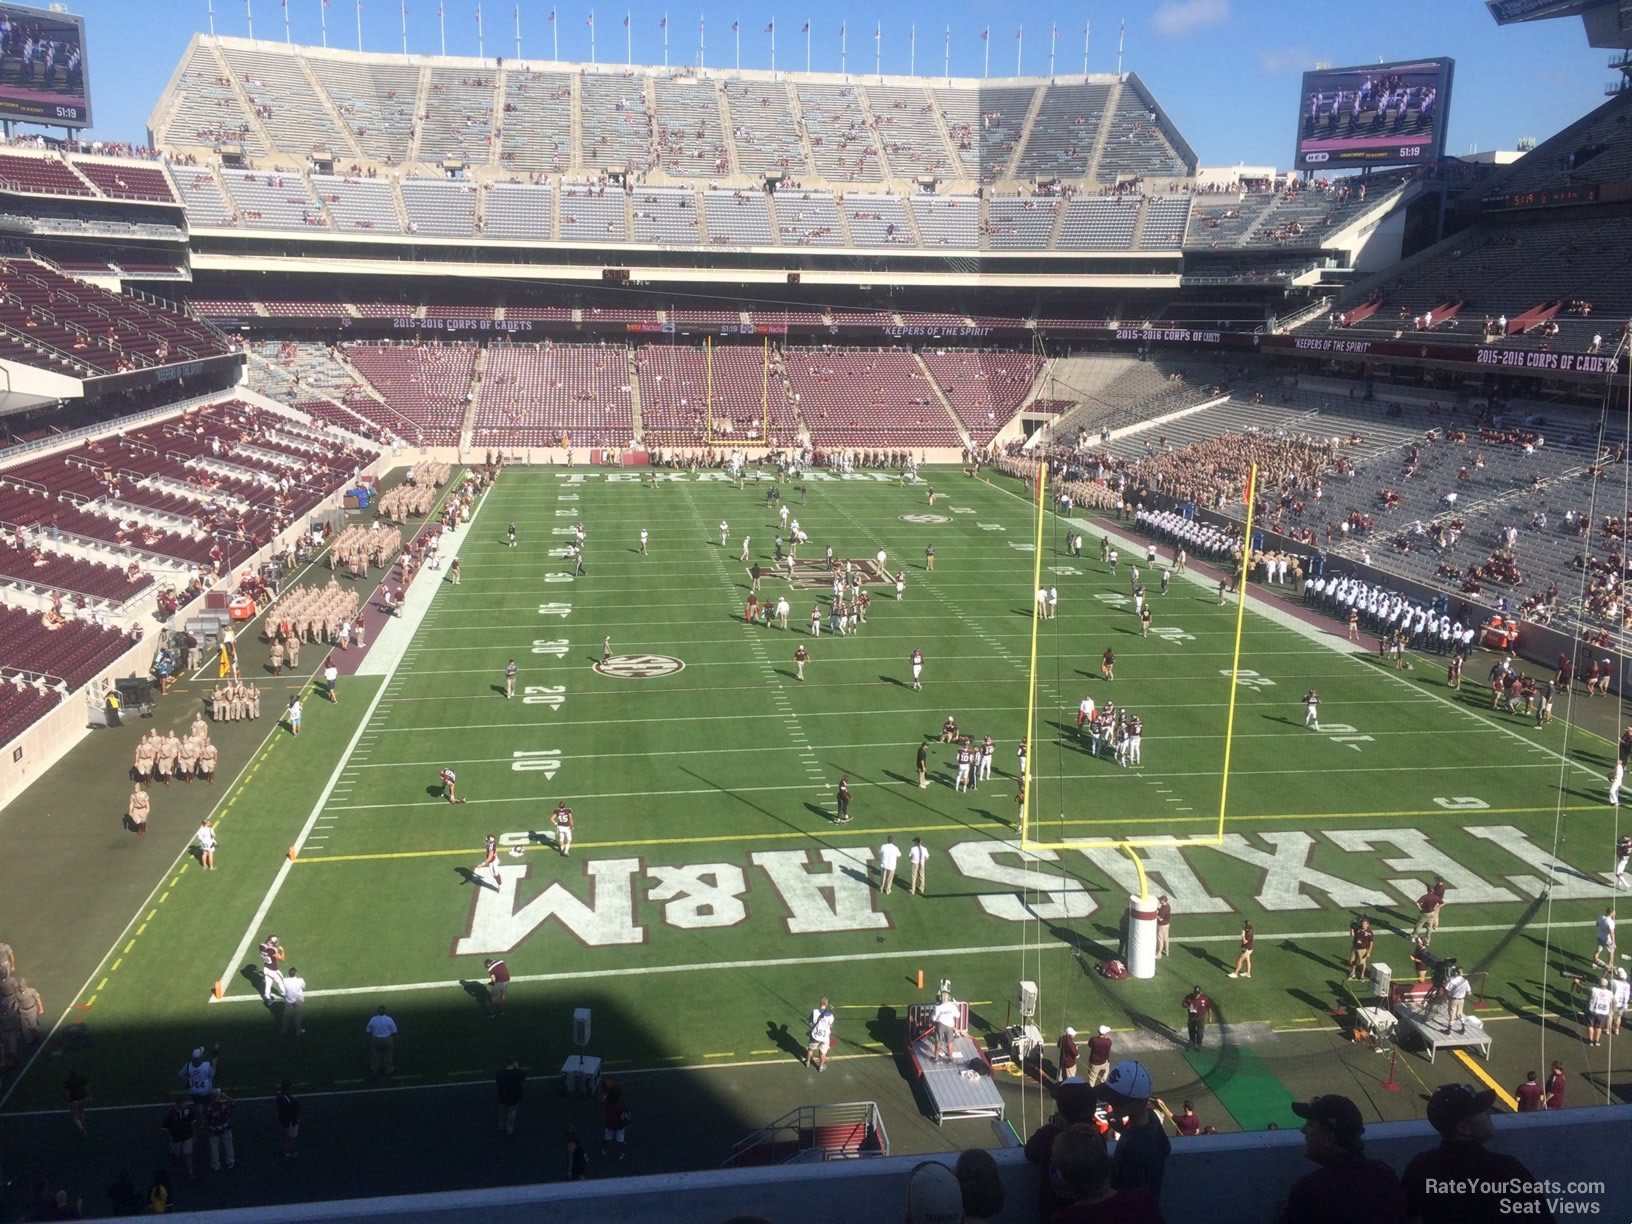 section 244, row 7 seat view  - kyle field